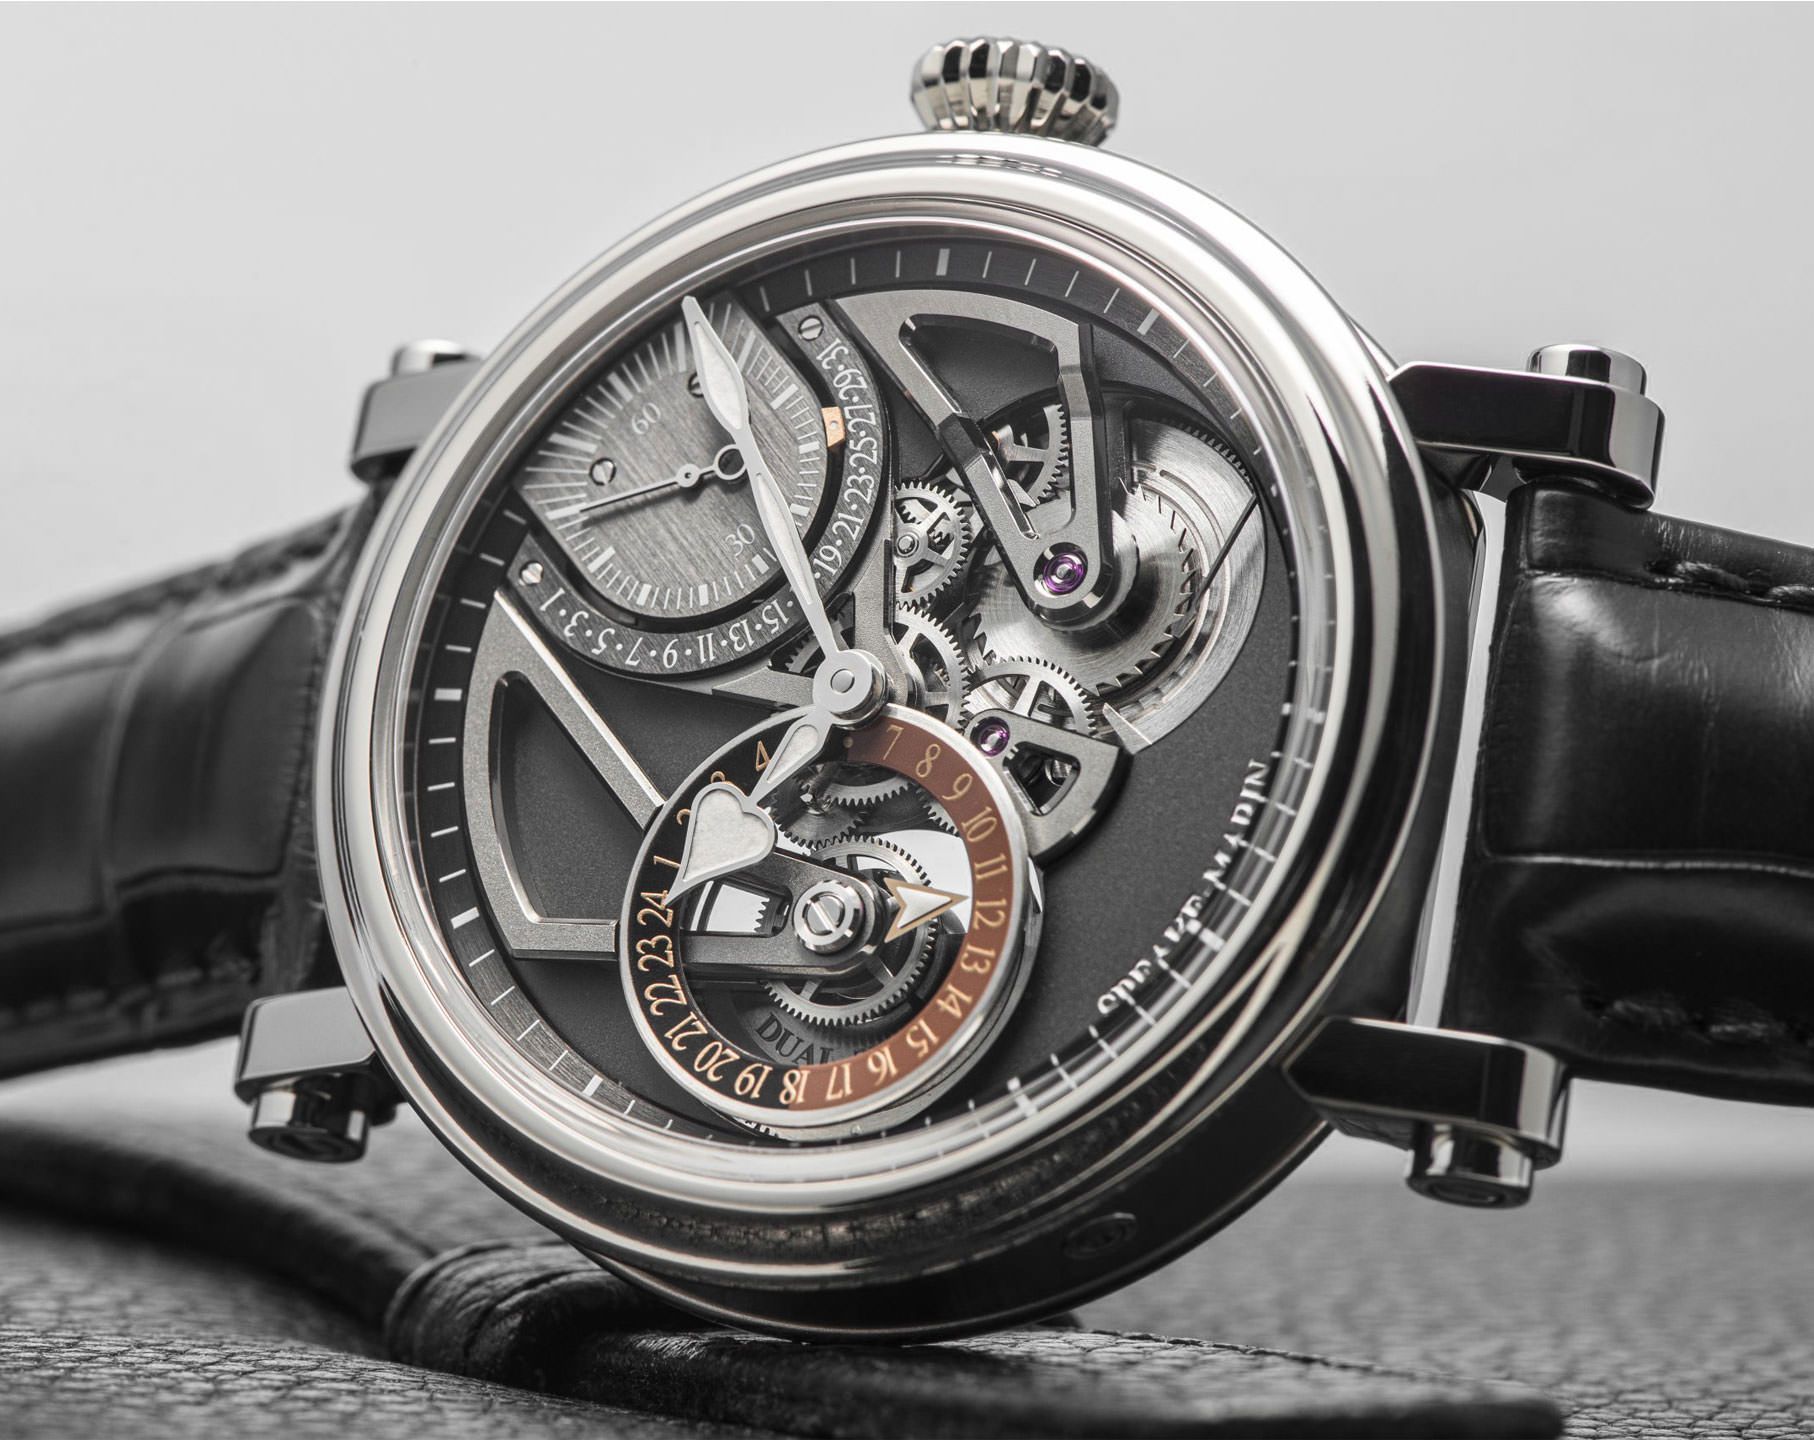 Speake-Marin One & Two Openworked Dual Time Skeleton Dial 42 mm Automatic Watch For Men - 3